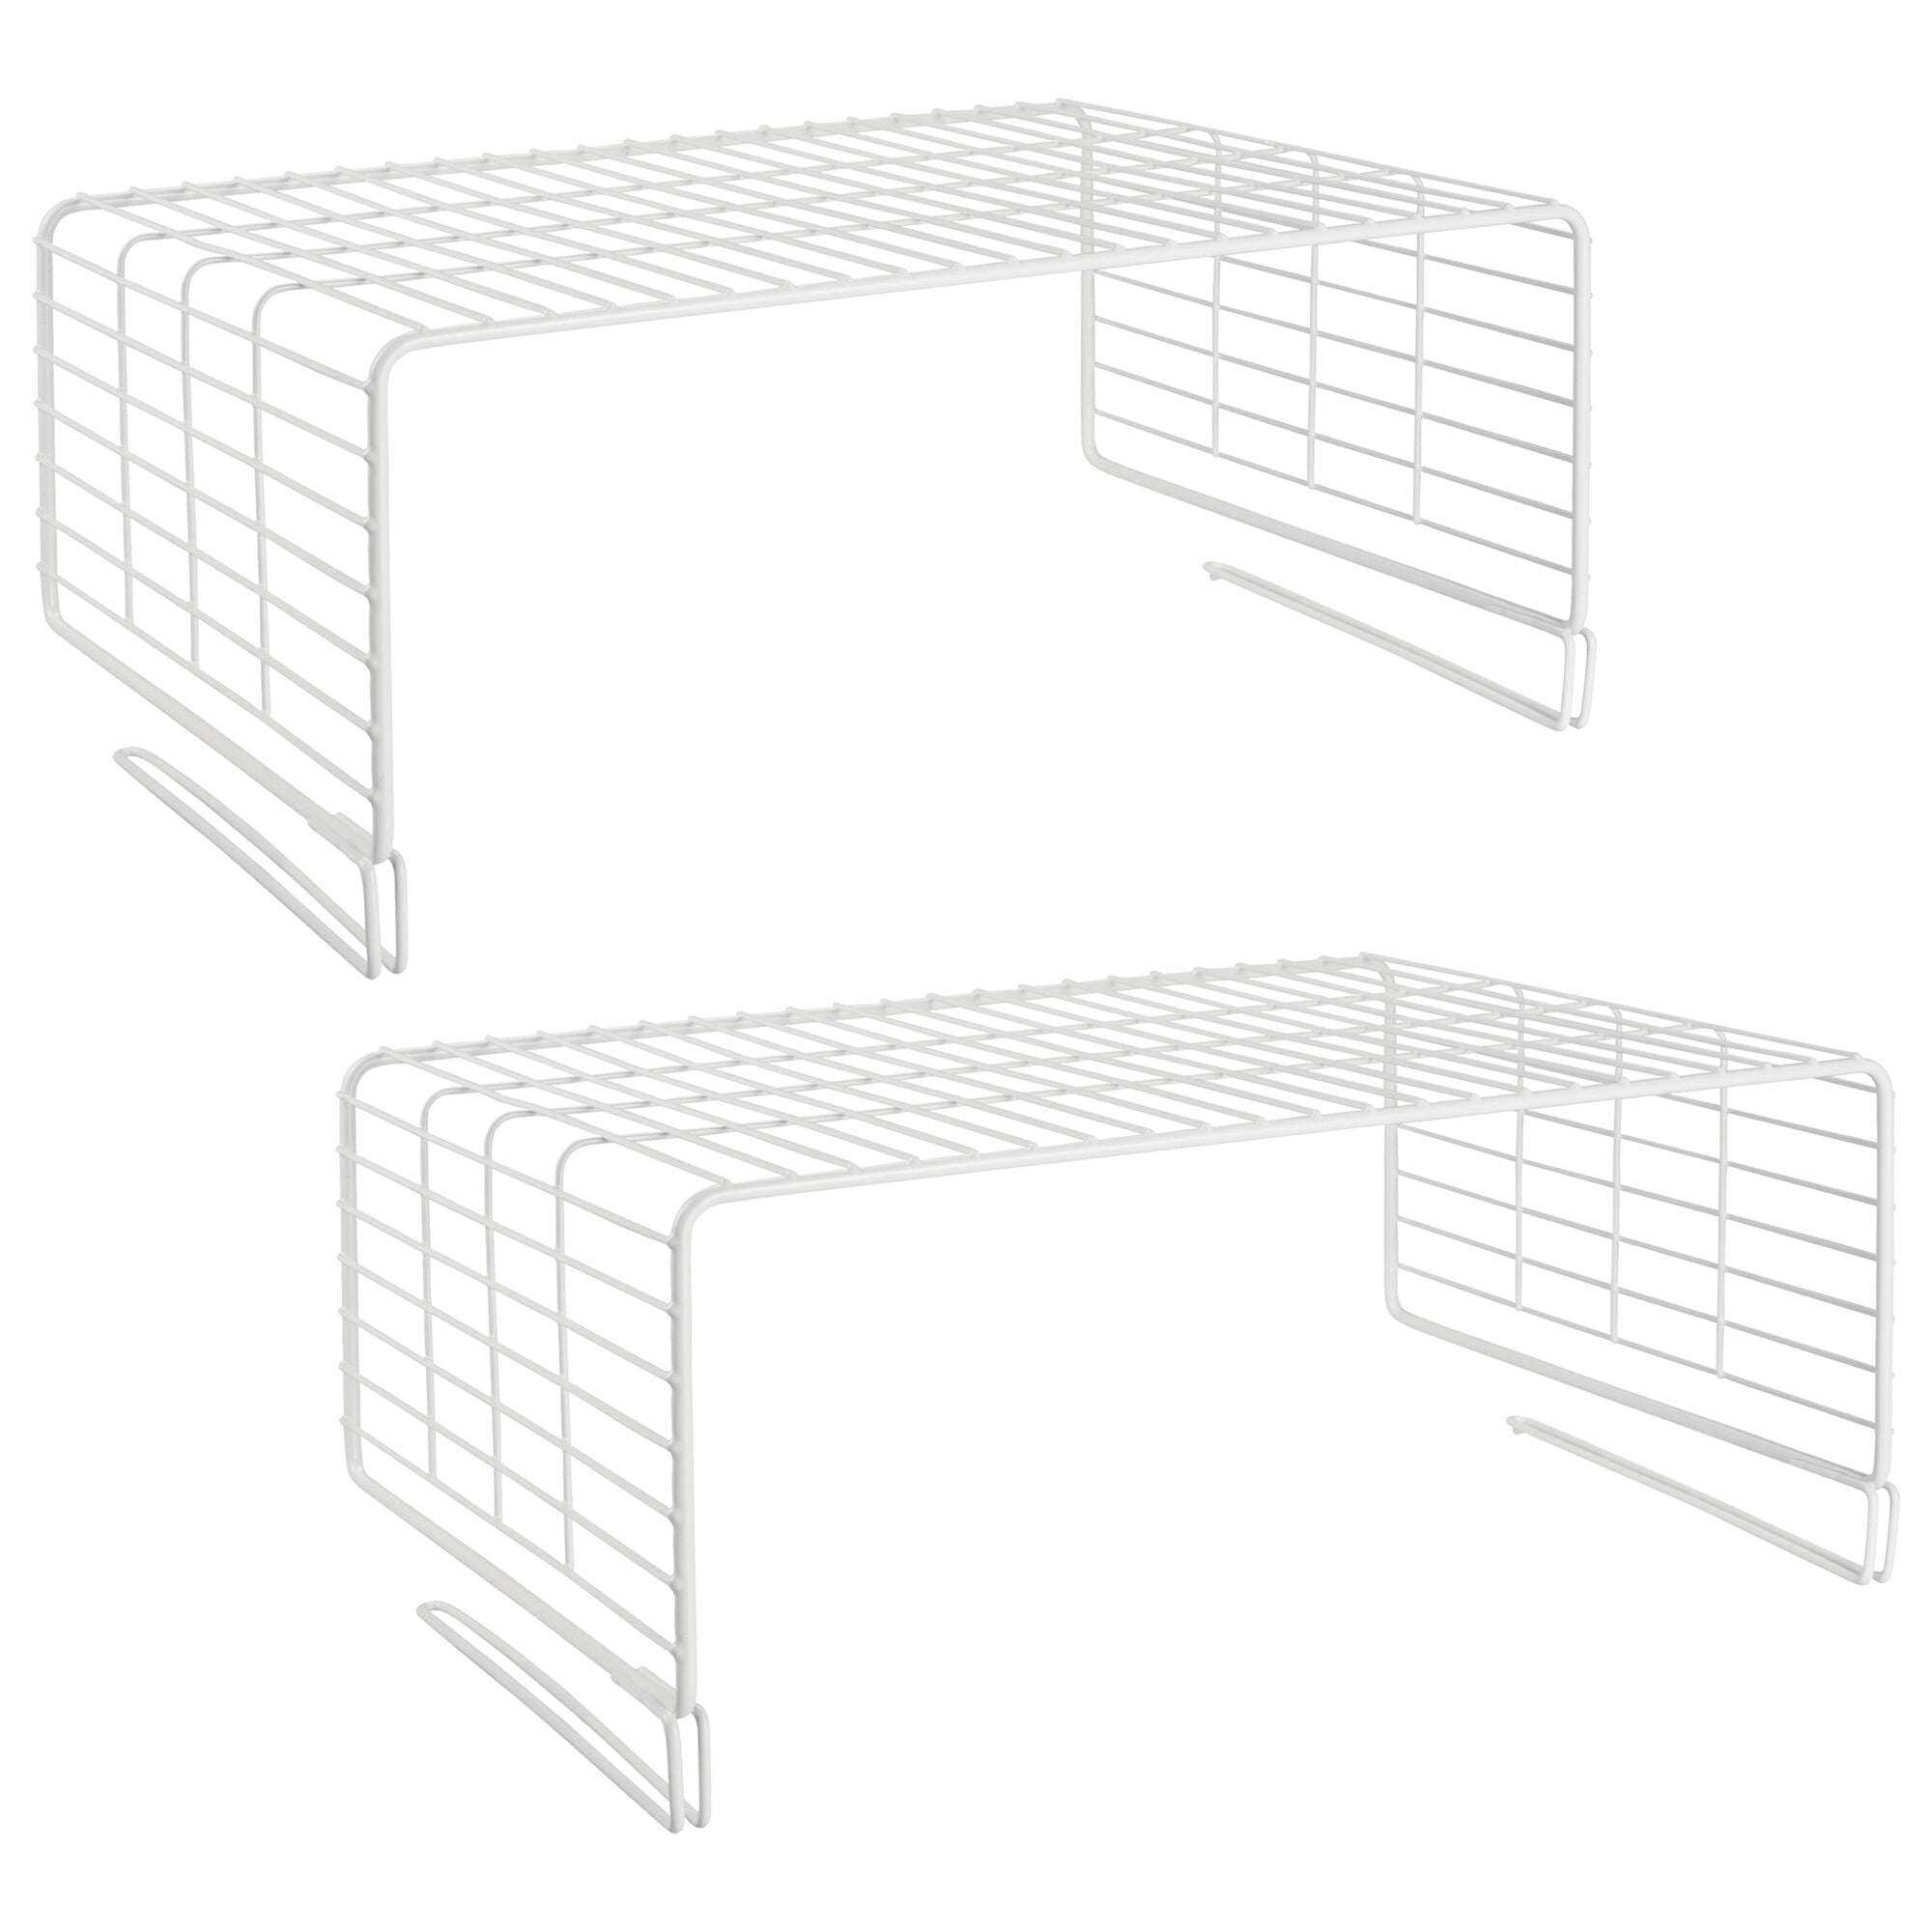 Neatly Made White Wire Shelf Dividers for Closet Organization – 12